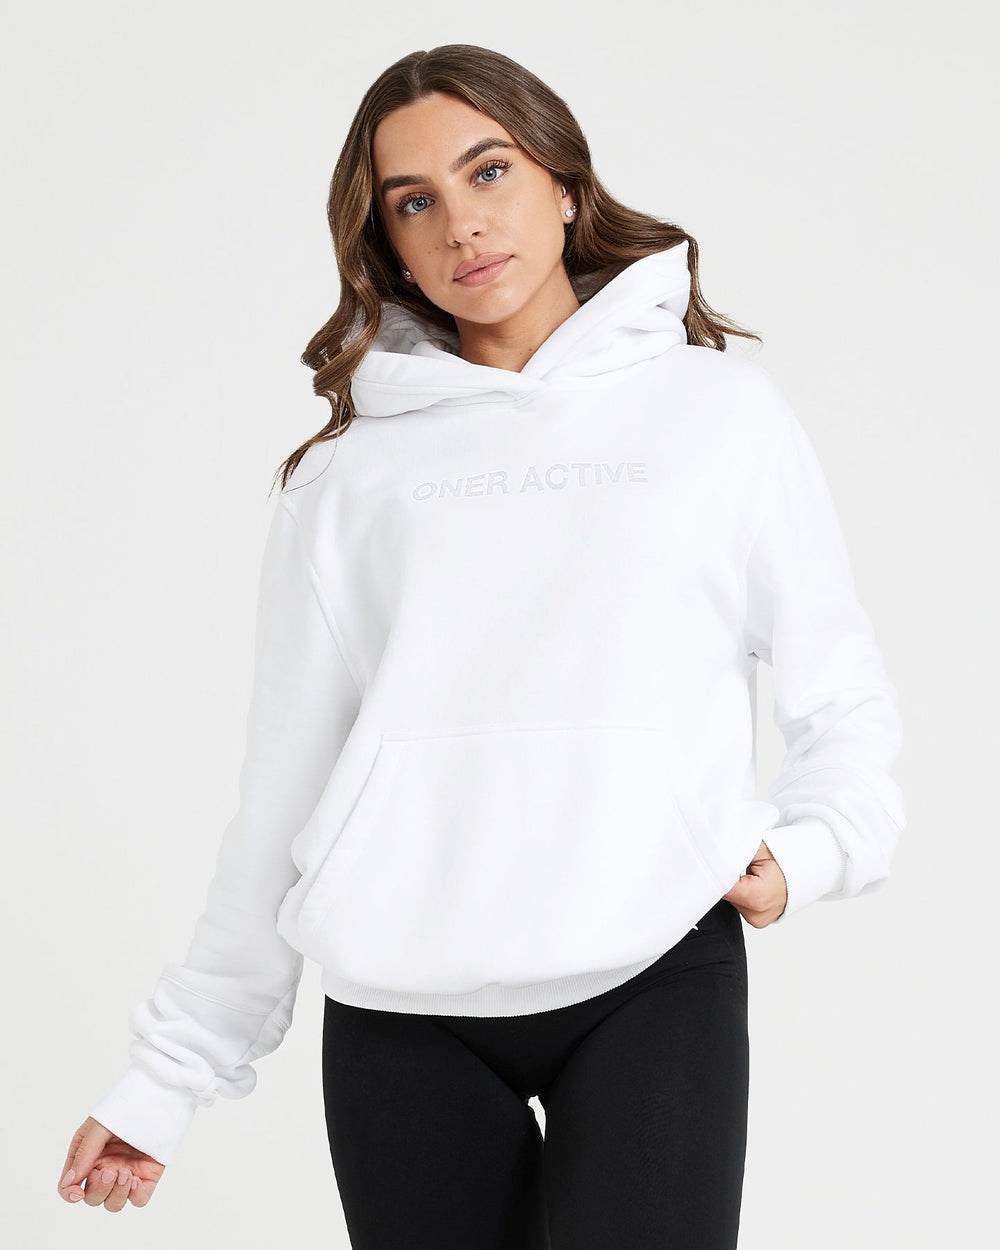 Sudadera Con Capucha Oner Active Mujer Shop Mexico - Classic Lounge  Oversized Hoodie Blancos